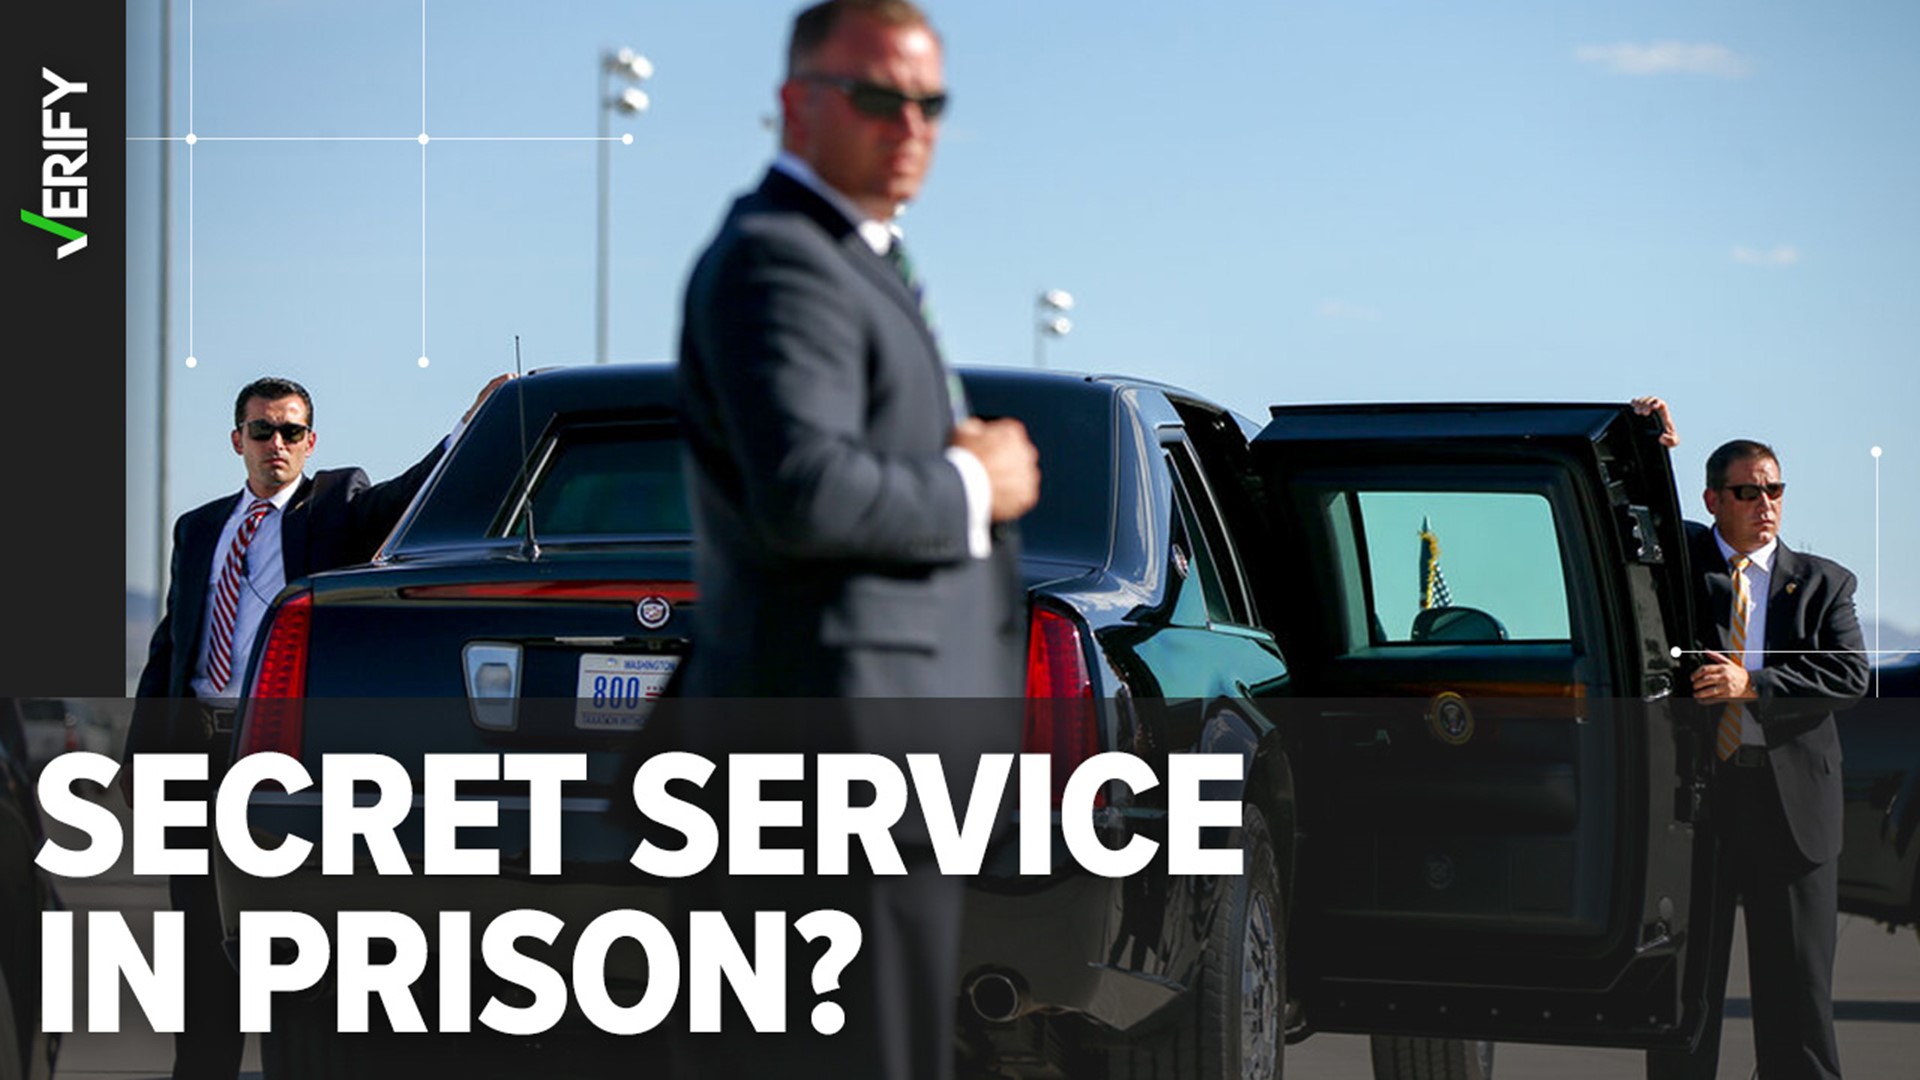 Many readers asked if former President Trump would get Secret Service protection if he’s convicted of a crime and goes to prison. Here’s why the answer is unclear.